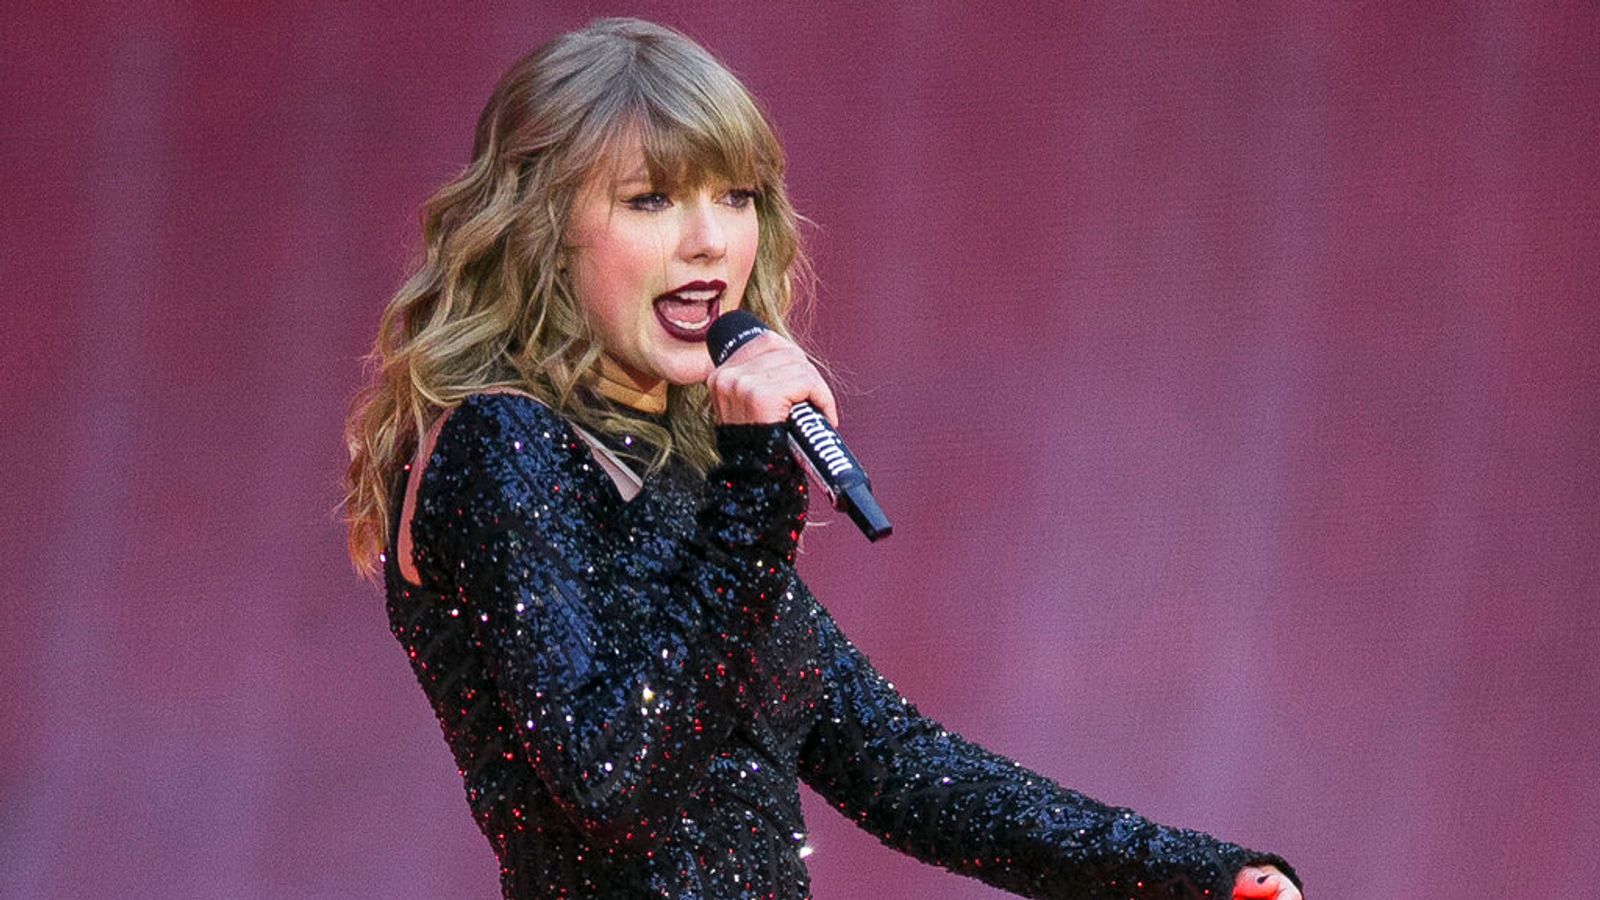 Taylor Swift: The Ticketmaster tour chaos explained – what happened and why is the US Senate involved?